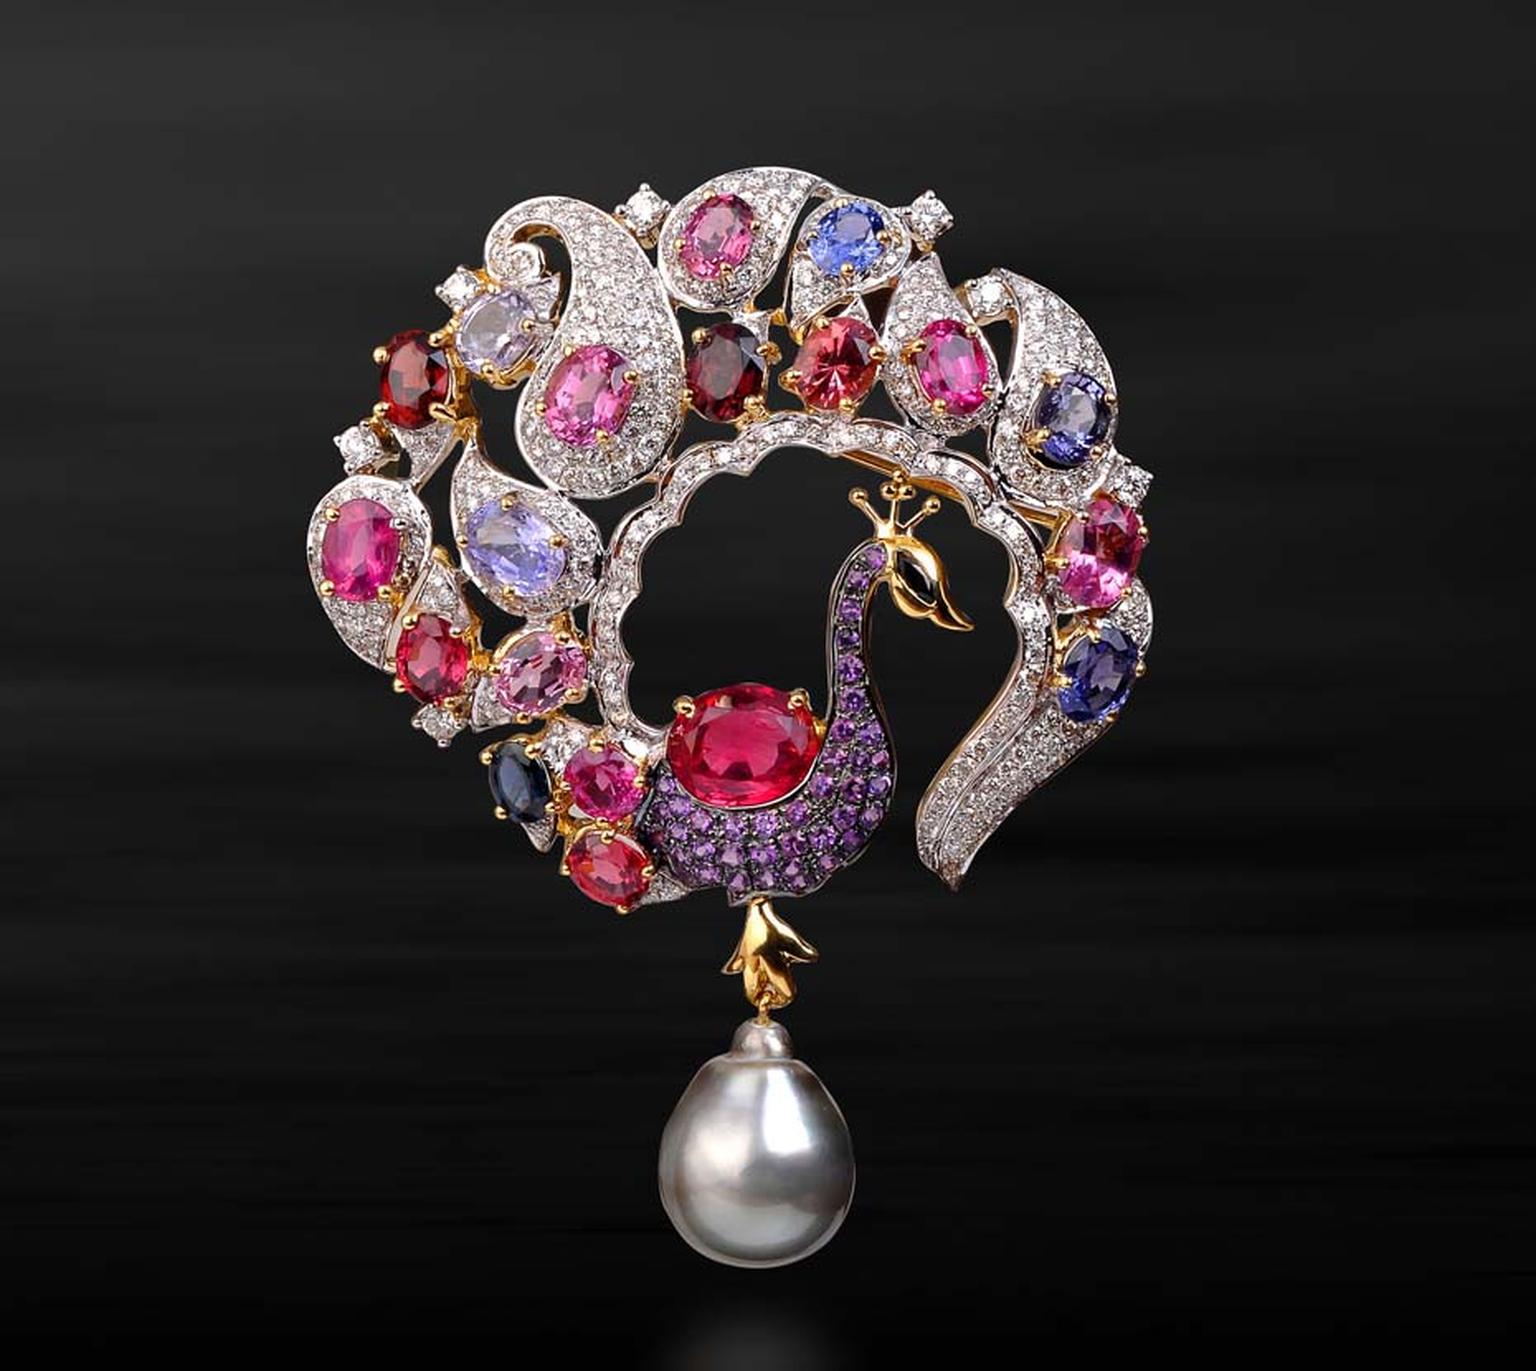 Farah Khan Peacock brooch with a paisley motif tail with a grey pearl, studded with multi-coloured gemstones.